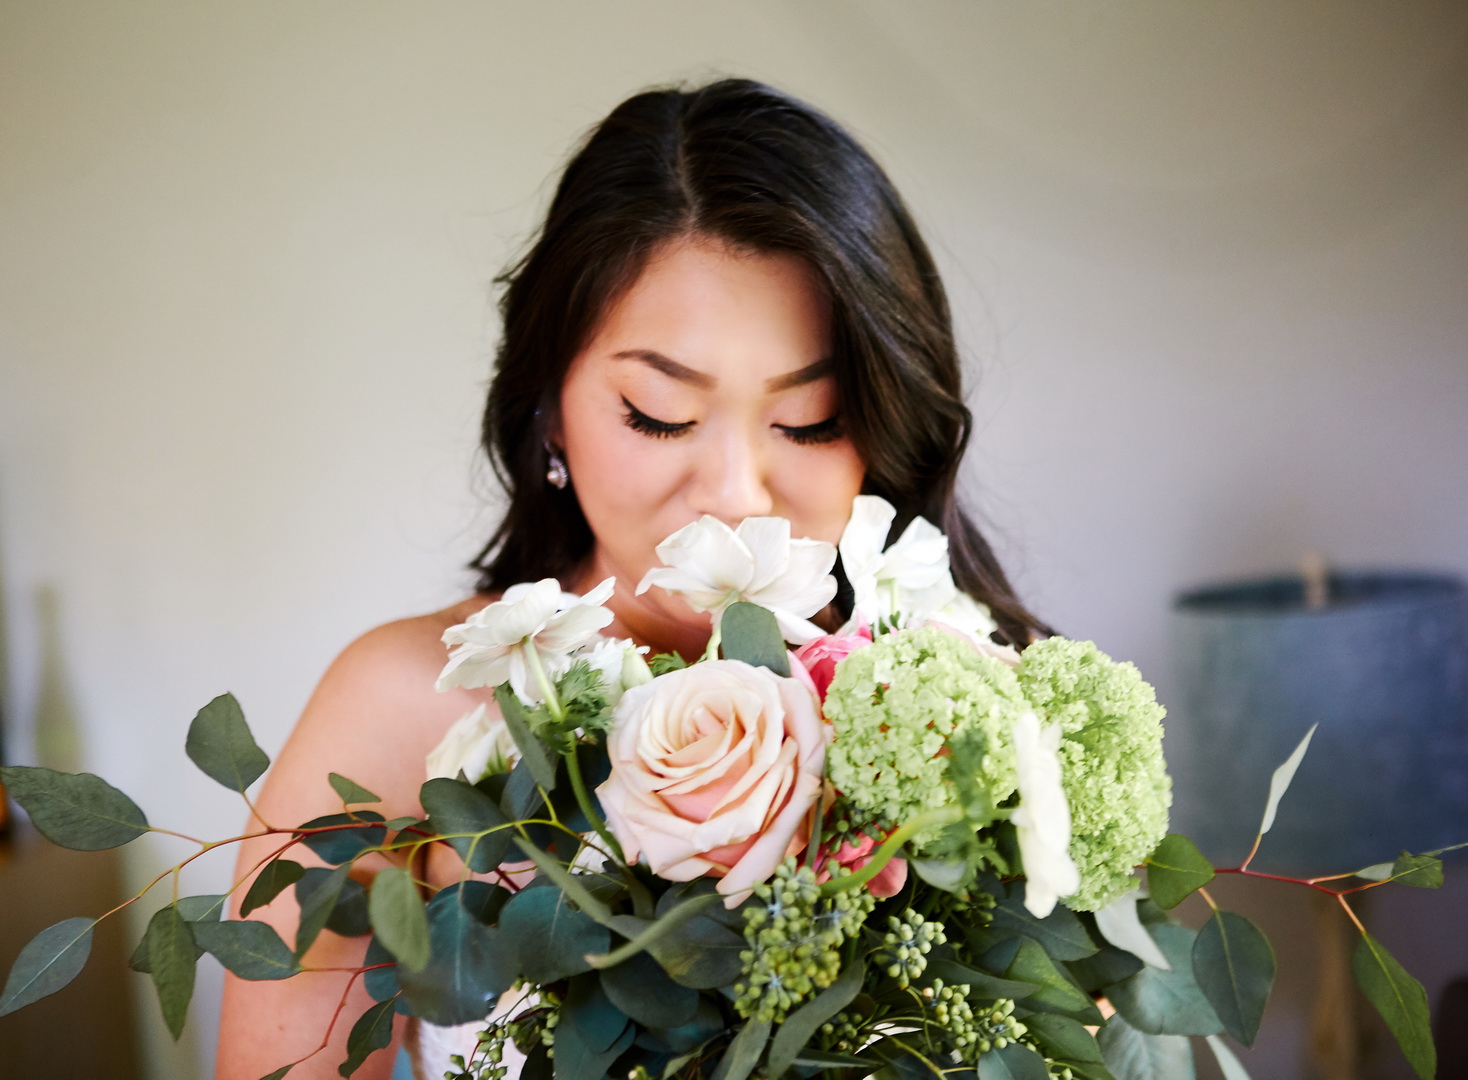 Bride smelling her bouquet of roses, anemones, and peonies.